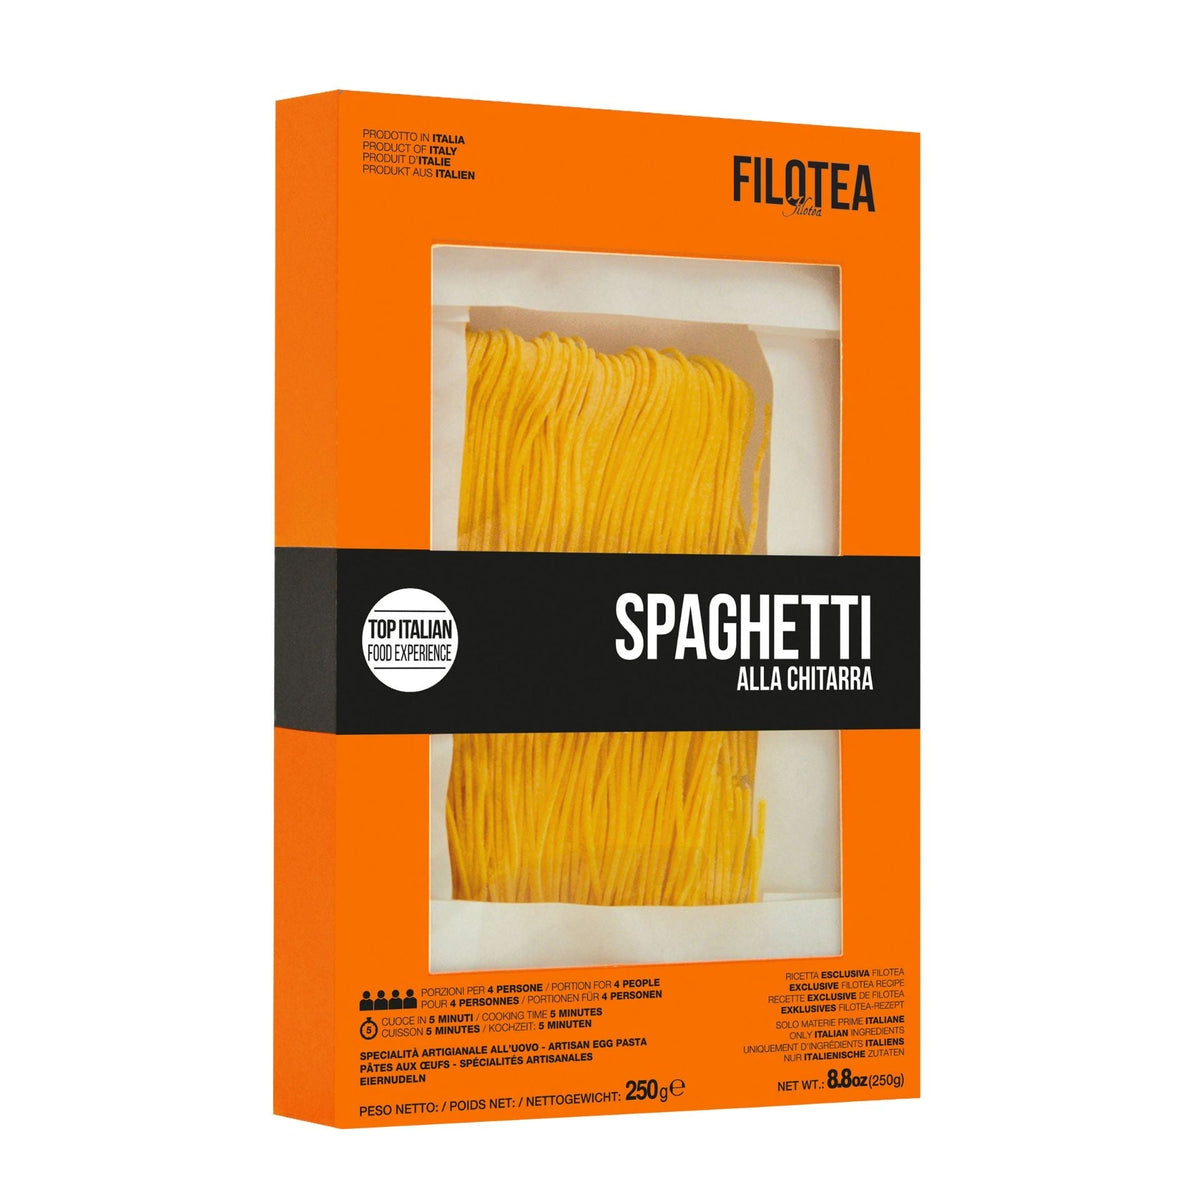 Filotea Spaghetti alla Chitarra Artisan Egg Pasta 250g  | Imported and distributed in the UK by Just Gourmet Foods